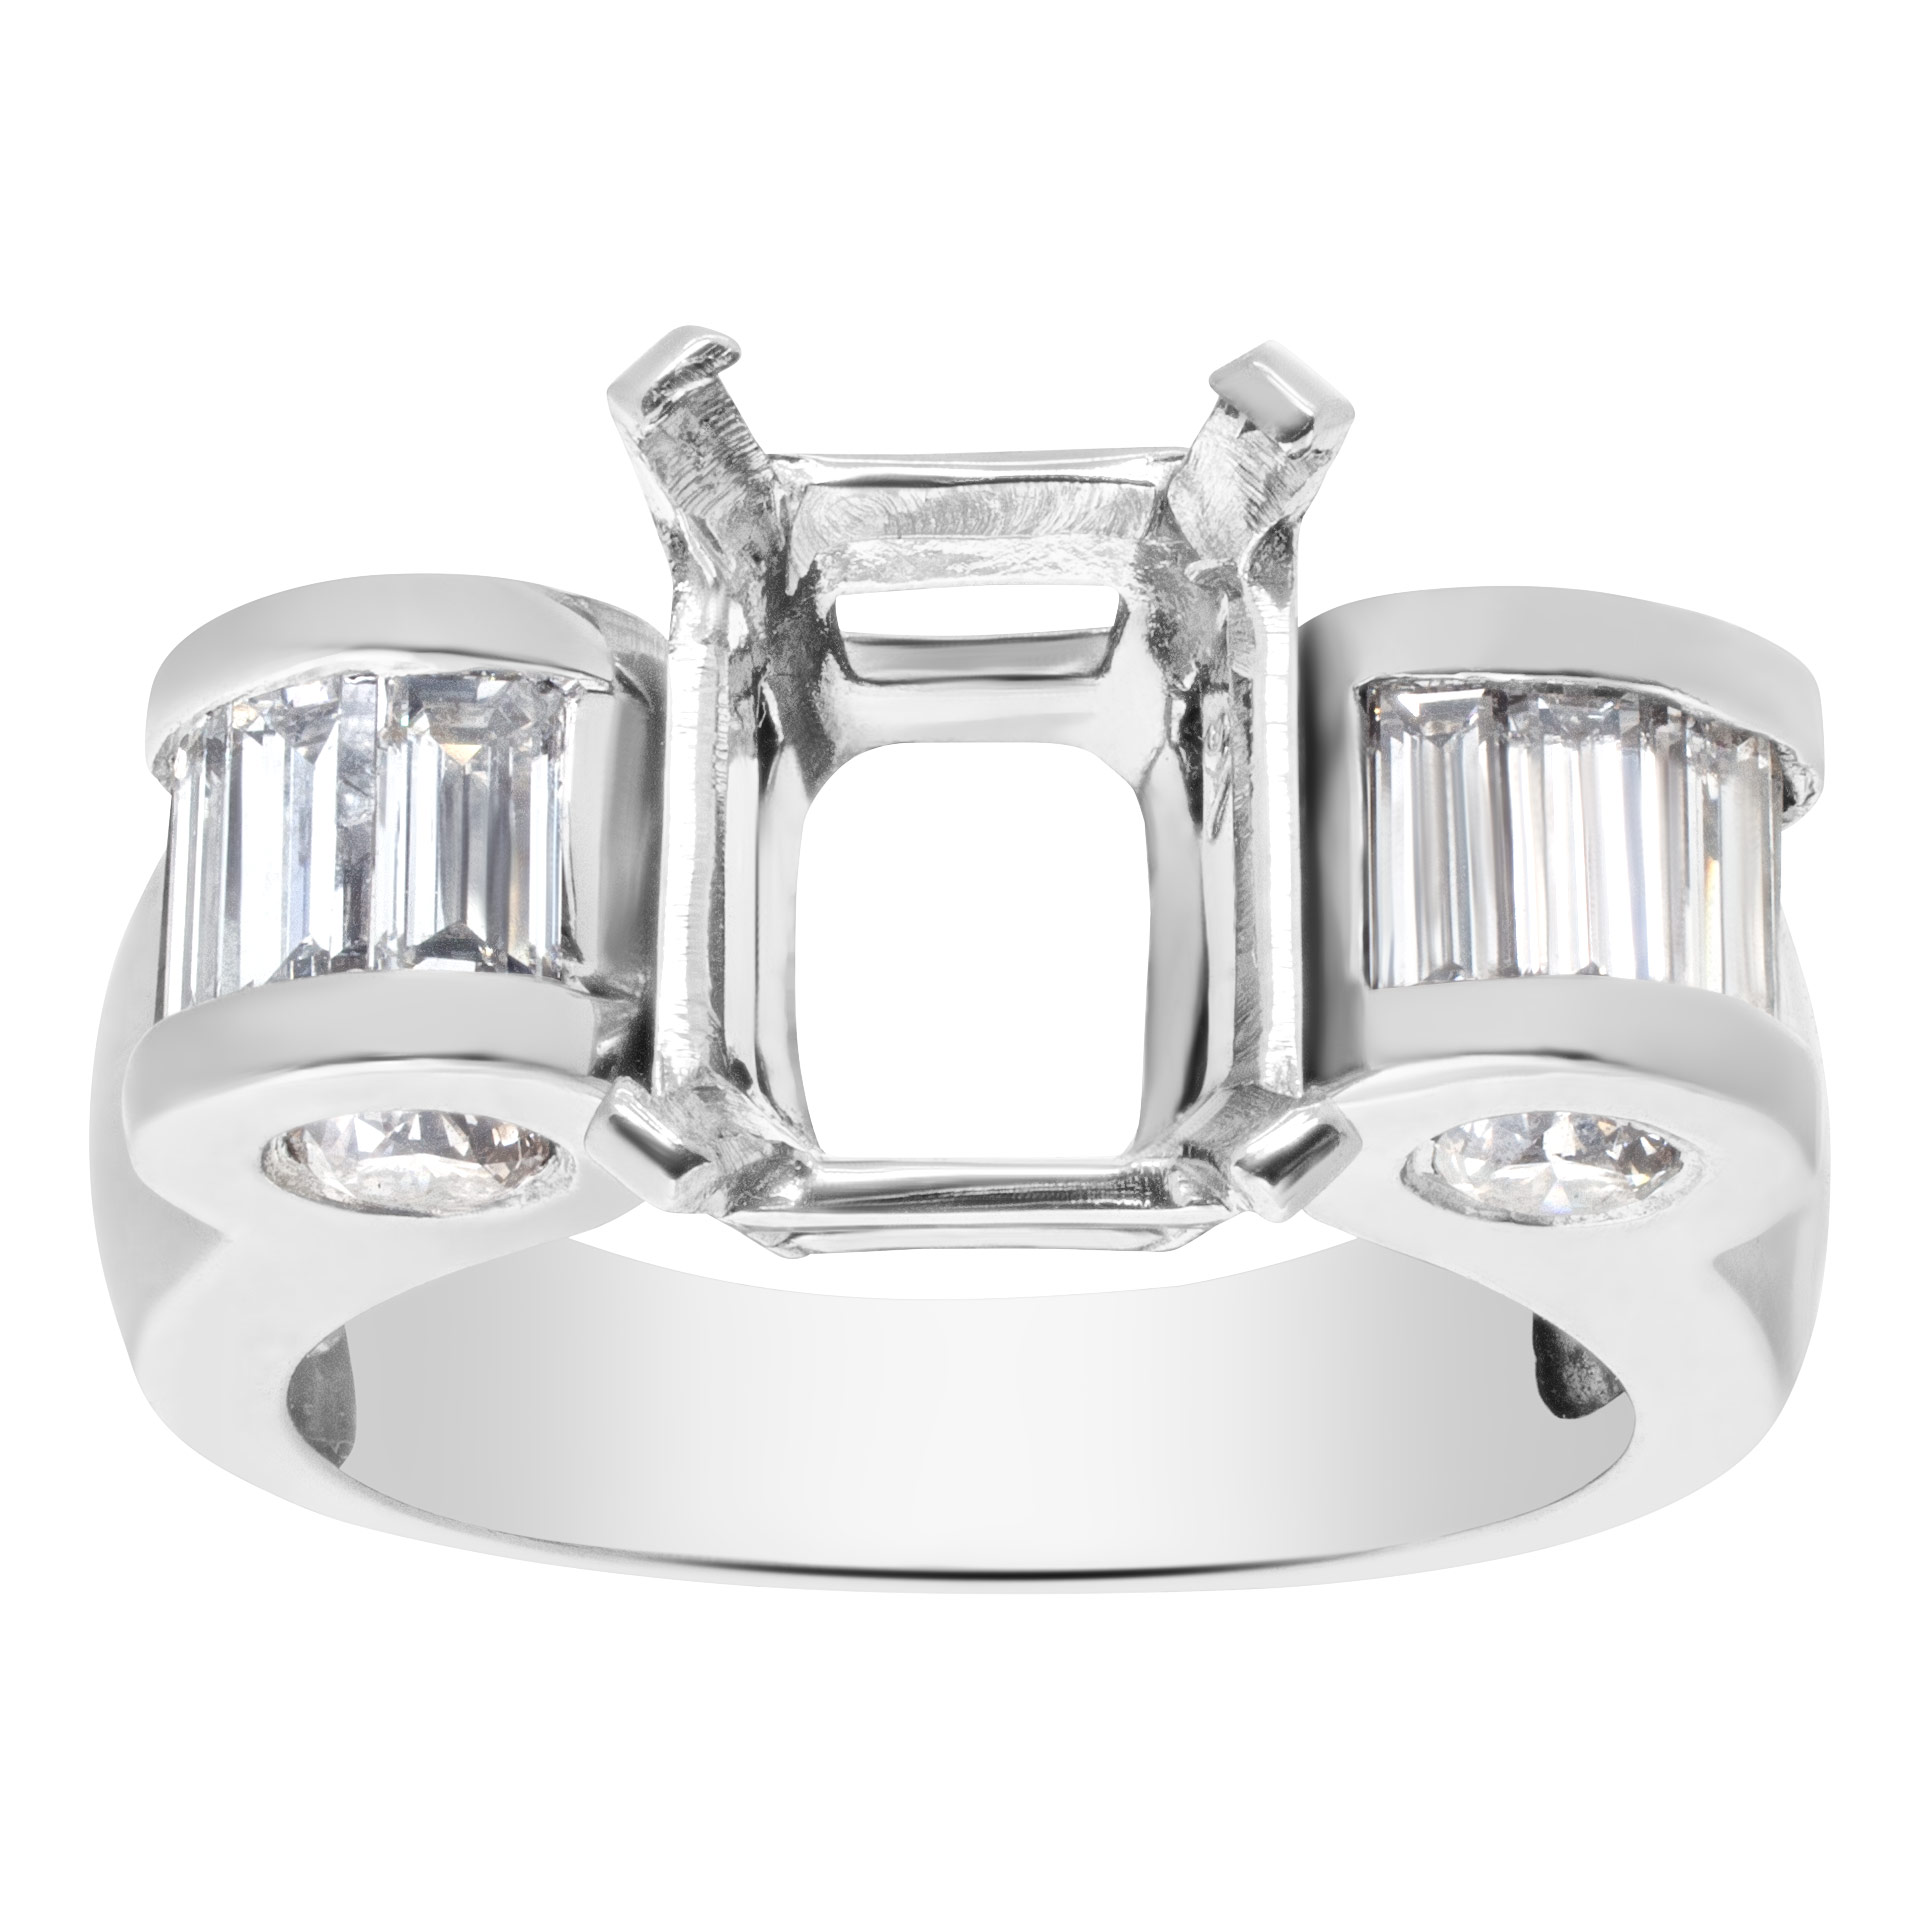 Unusual Setting for approx 2 to 2 1/2 carat Emerald cut stone in Platinum with approx 1 carat round and bsaguette cut stone.